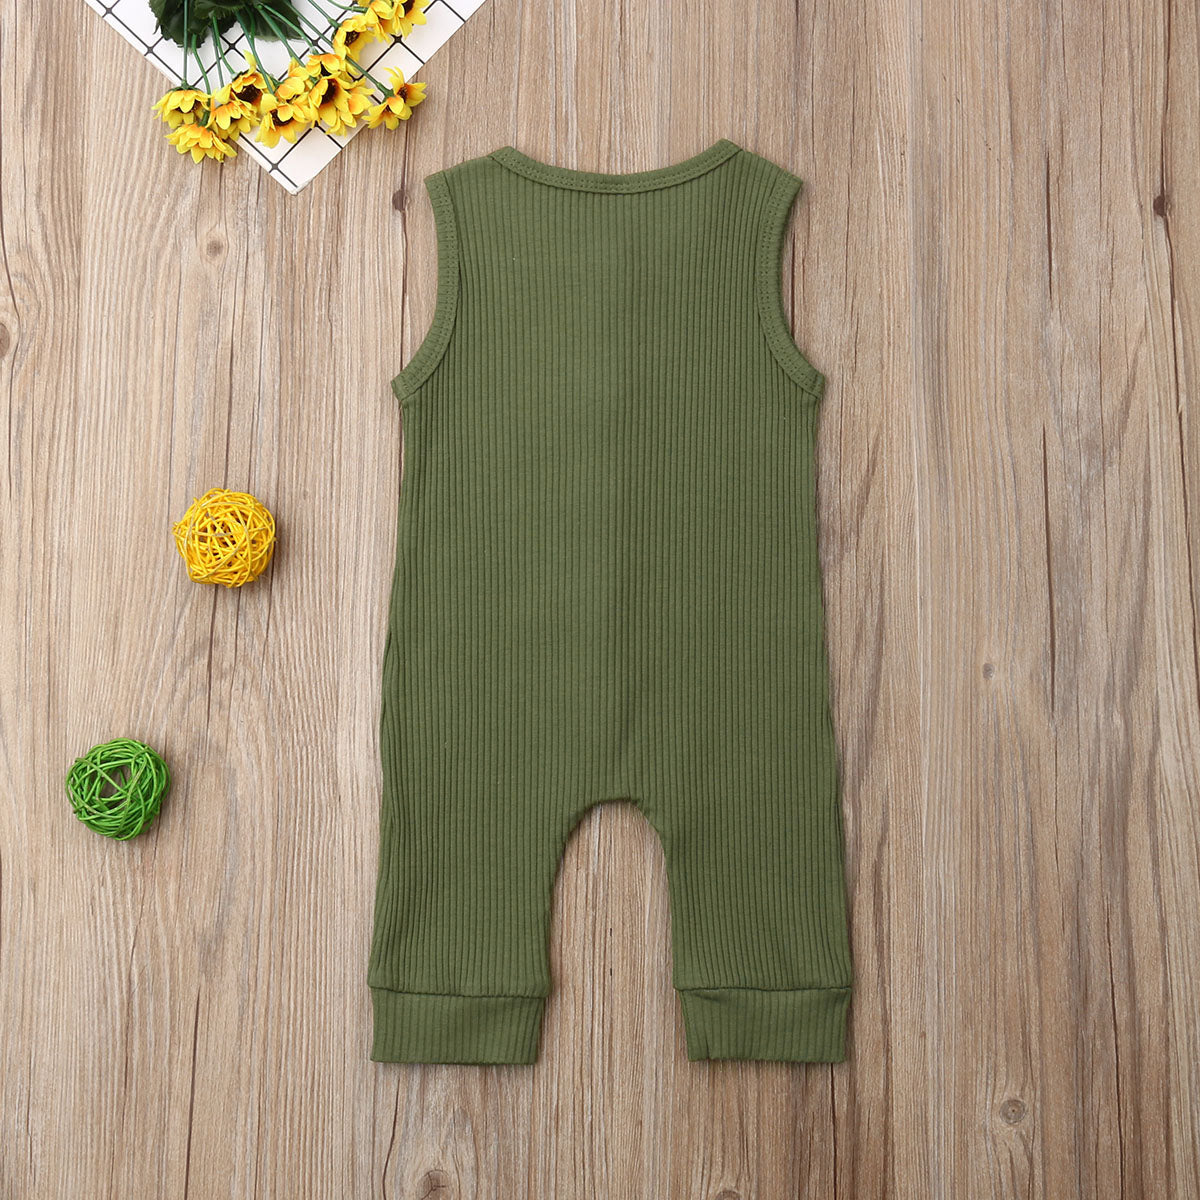 Karley Button Onesie More Colors - Abby Apples Boutique